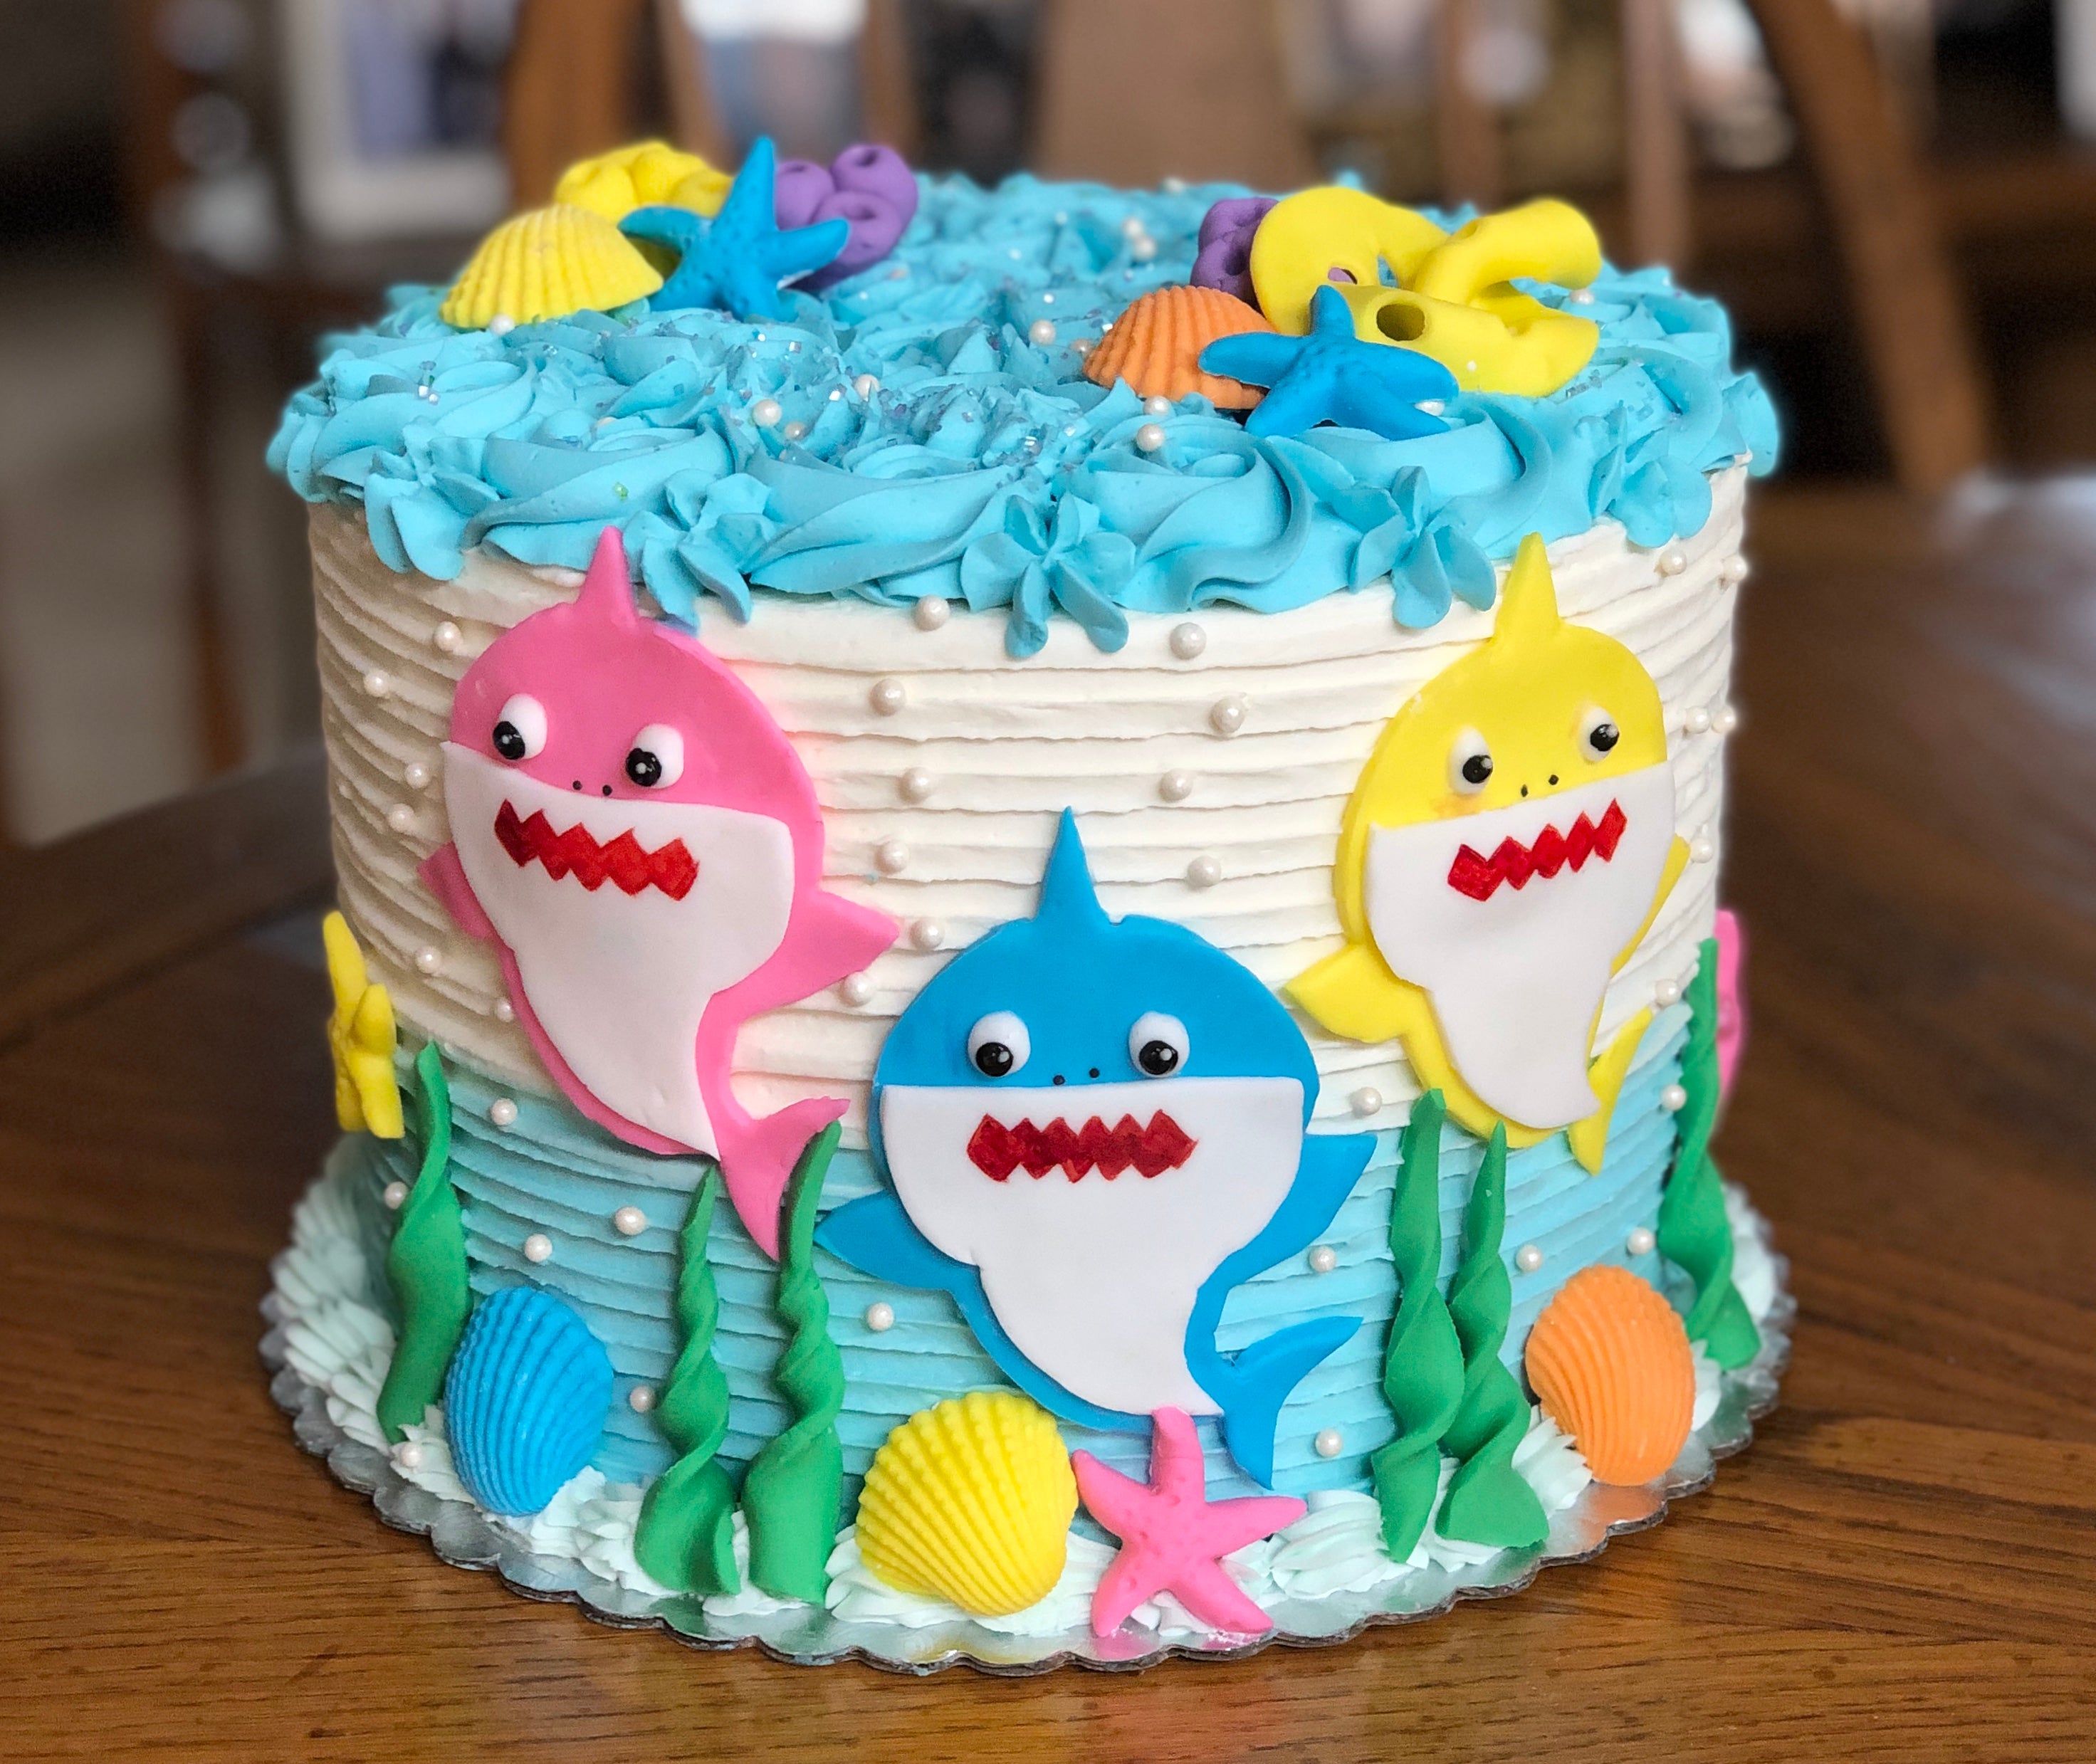 Wife made a baby shark cake for our sons 3rd birthday : r/cakedecorating